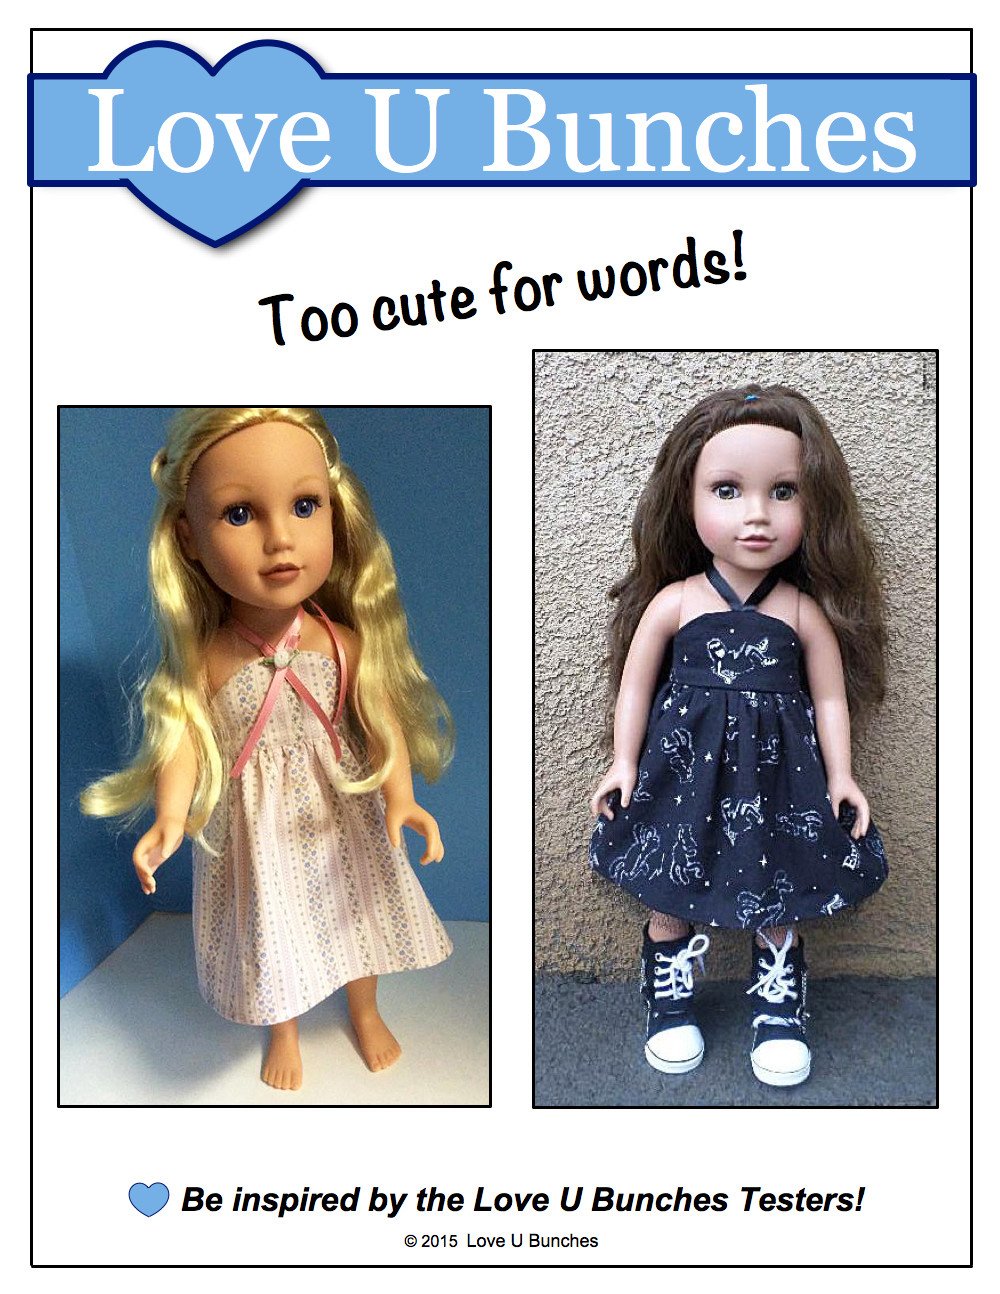 Simply Summer Sundress 6 Inch Doll Clothes Pattern Fits Mini Dolls Such as  American Girl® Love U Bunches PDF Pixie Faire 